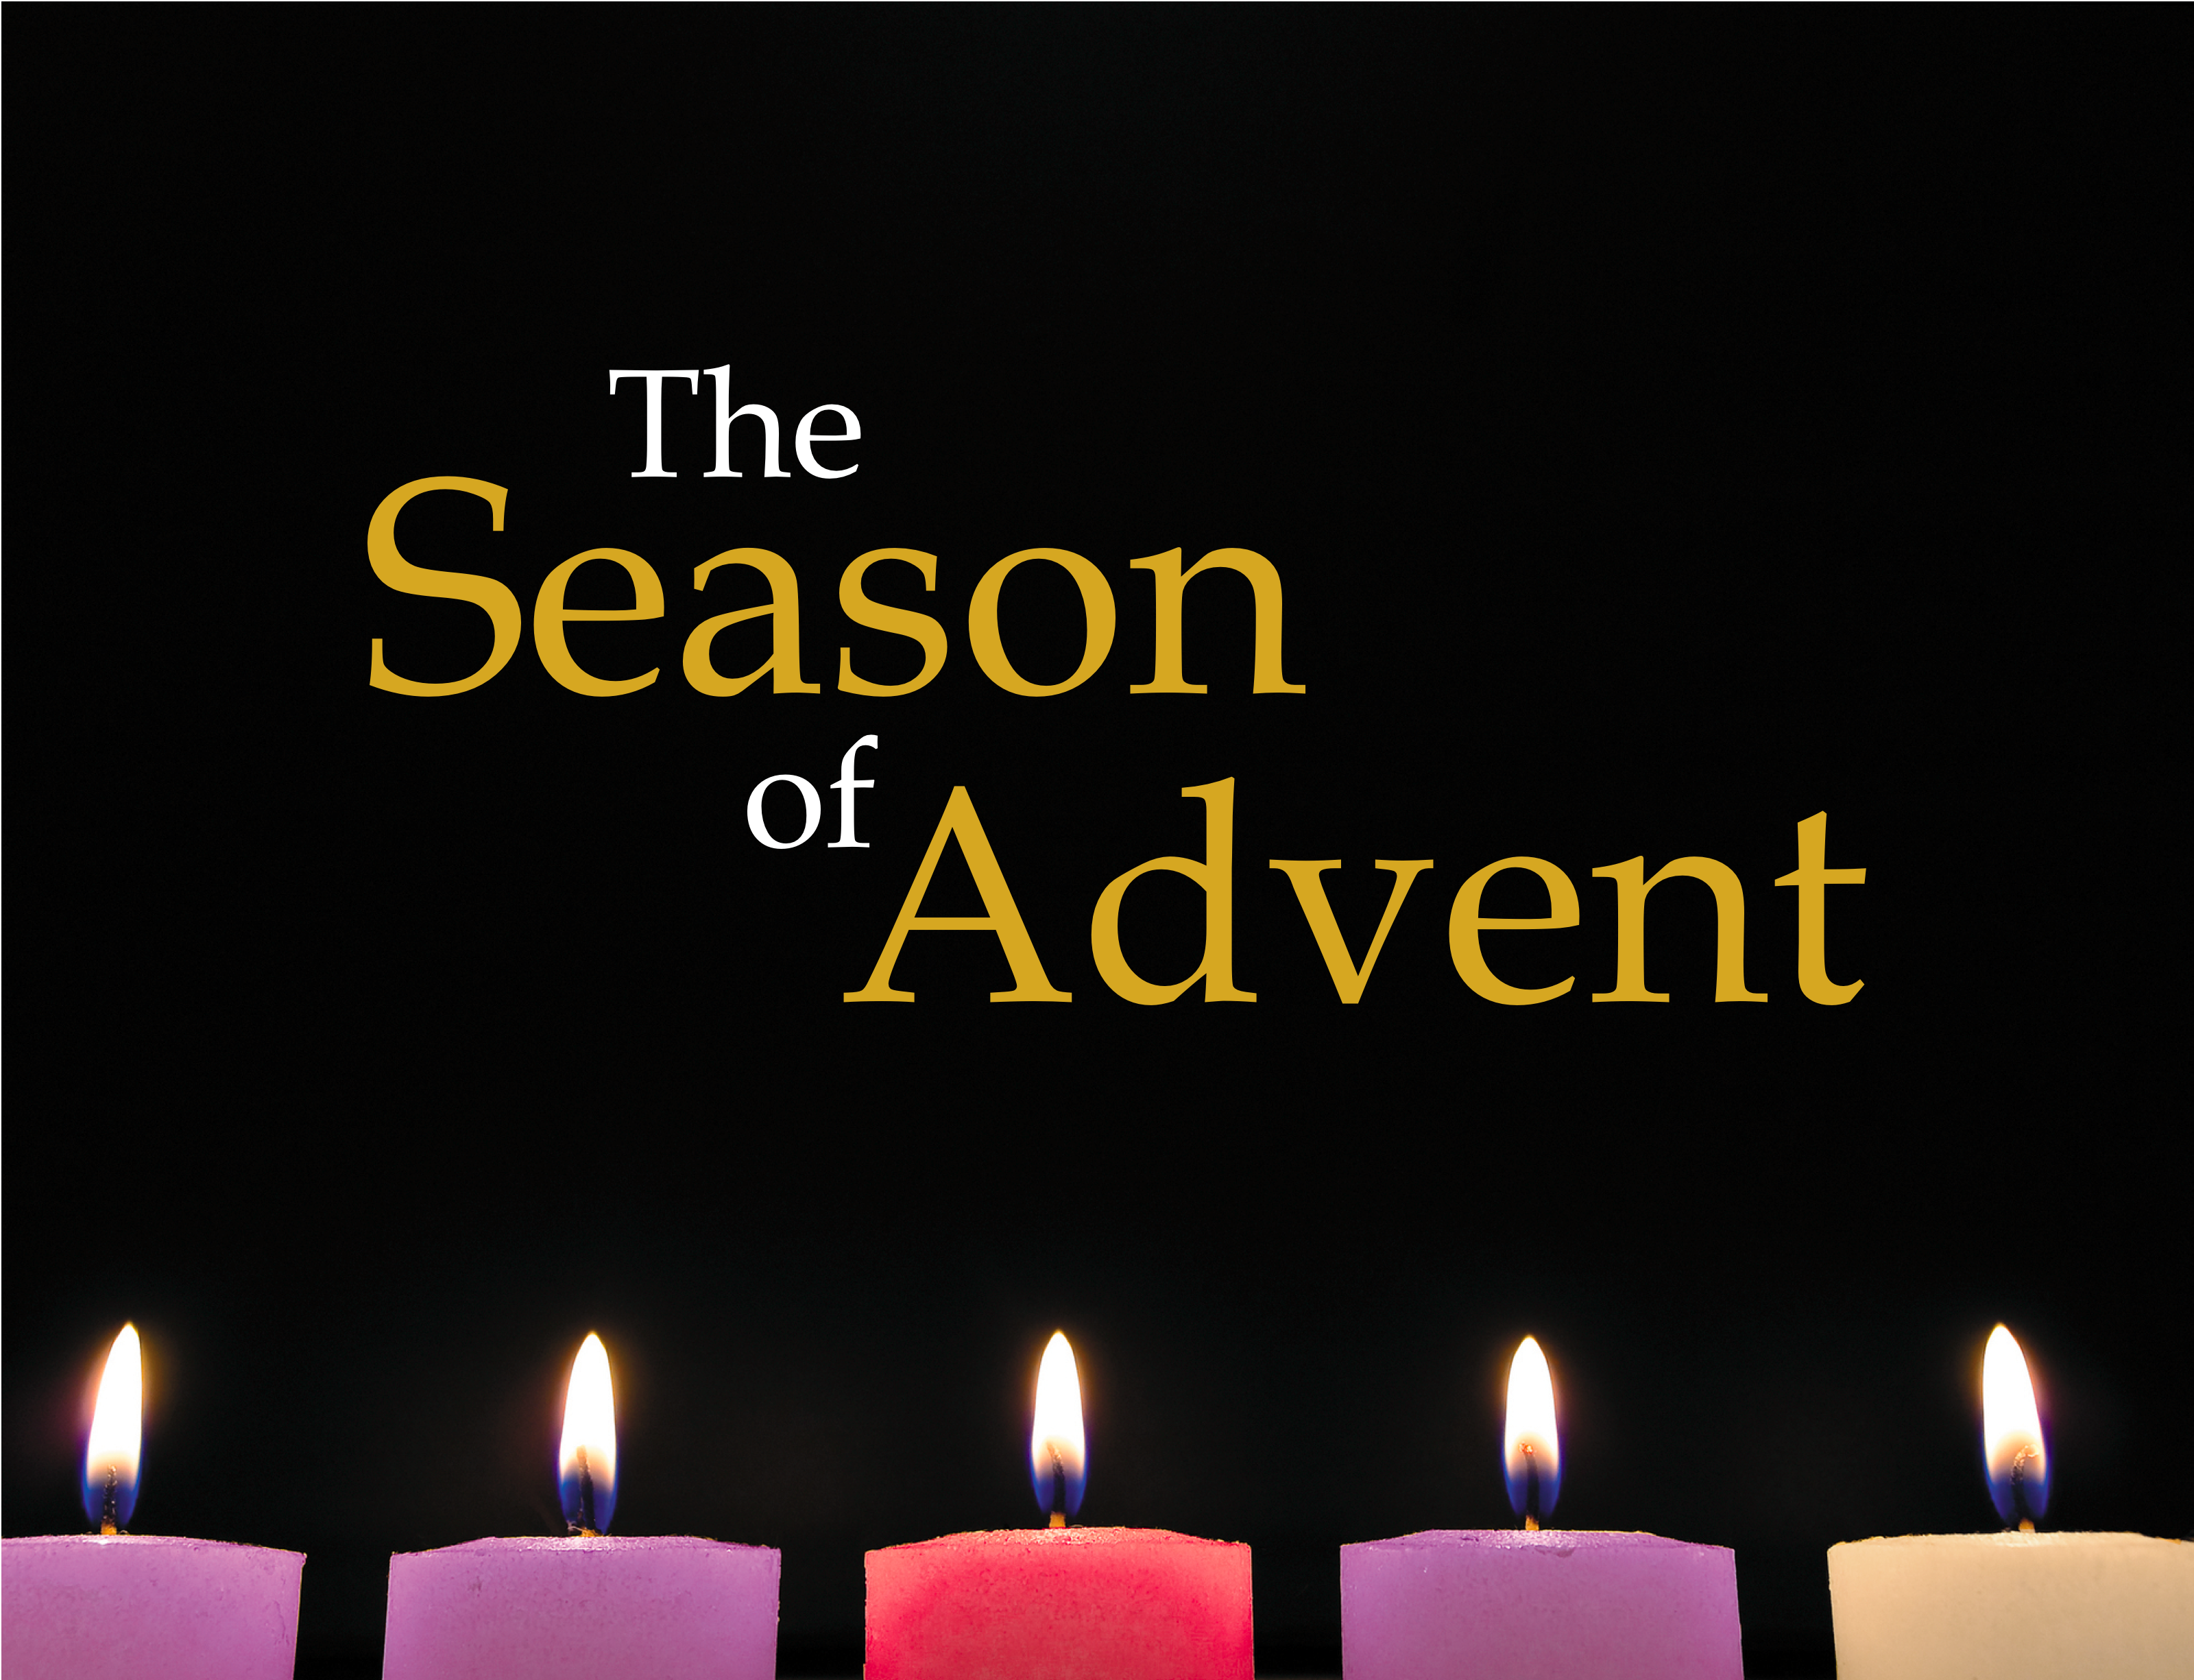 Advent Meaning and Definition